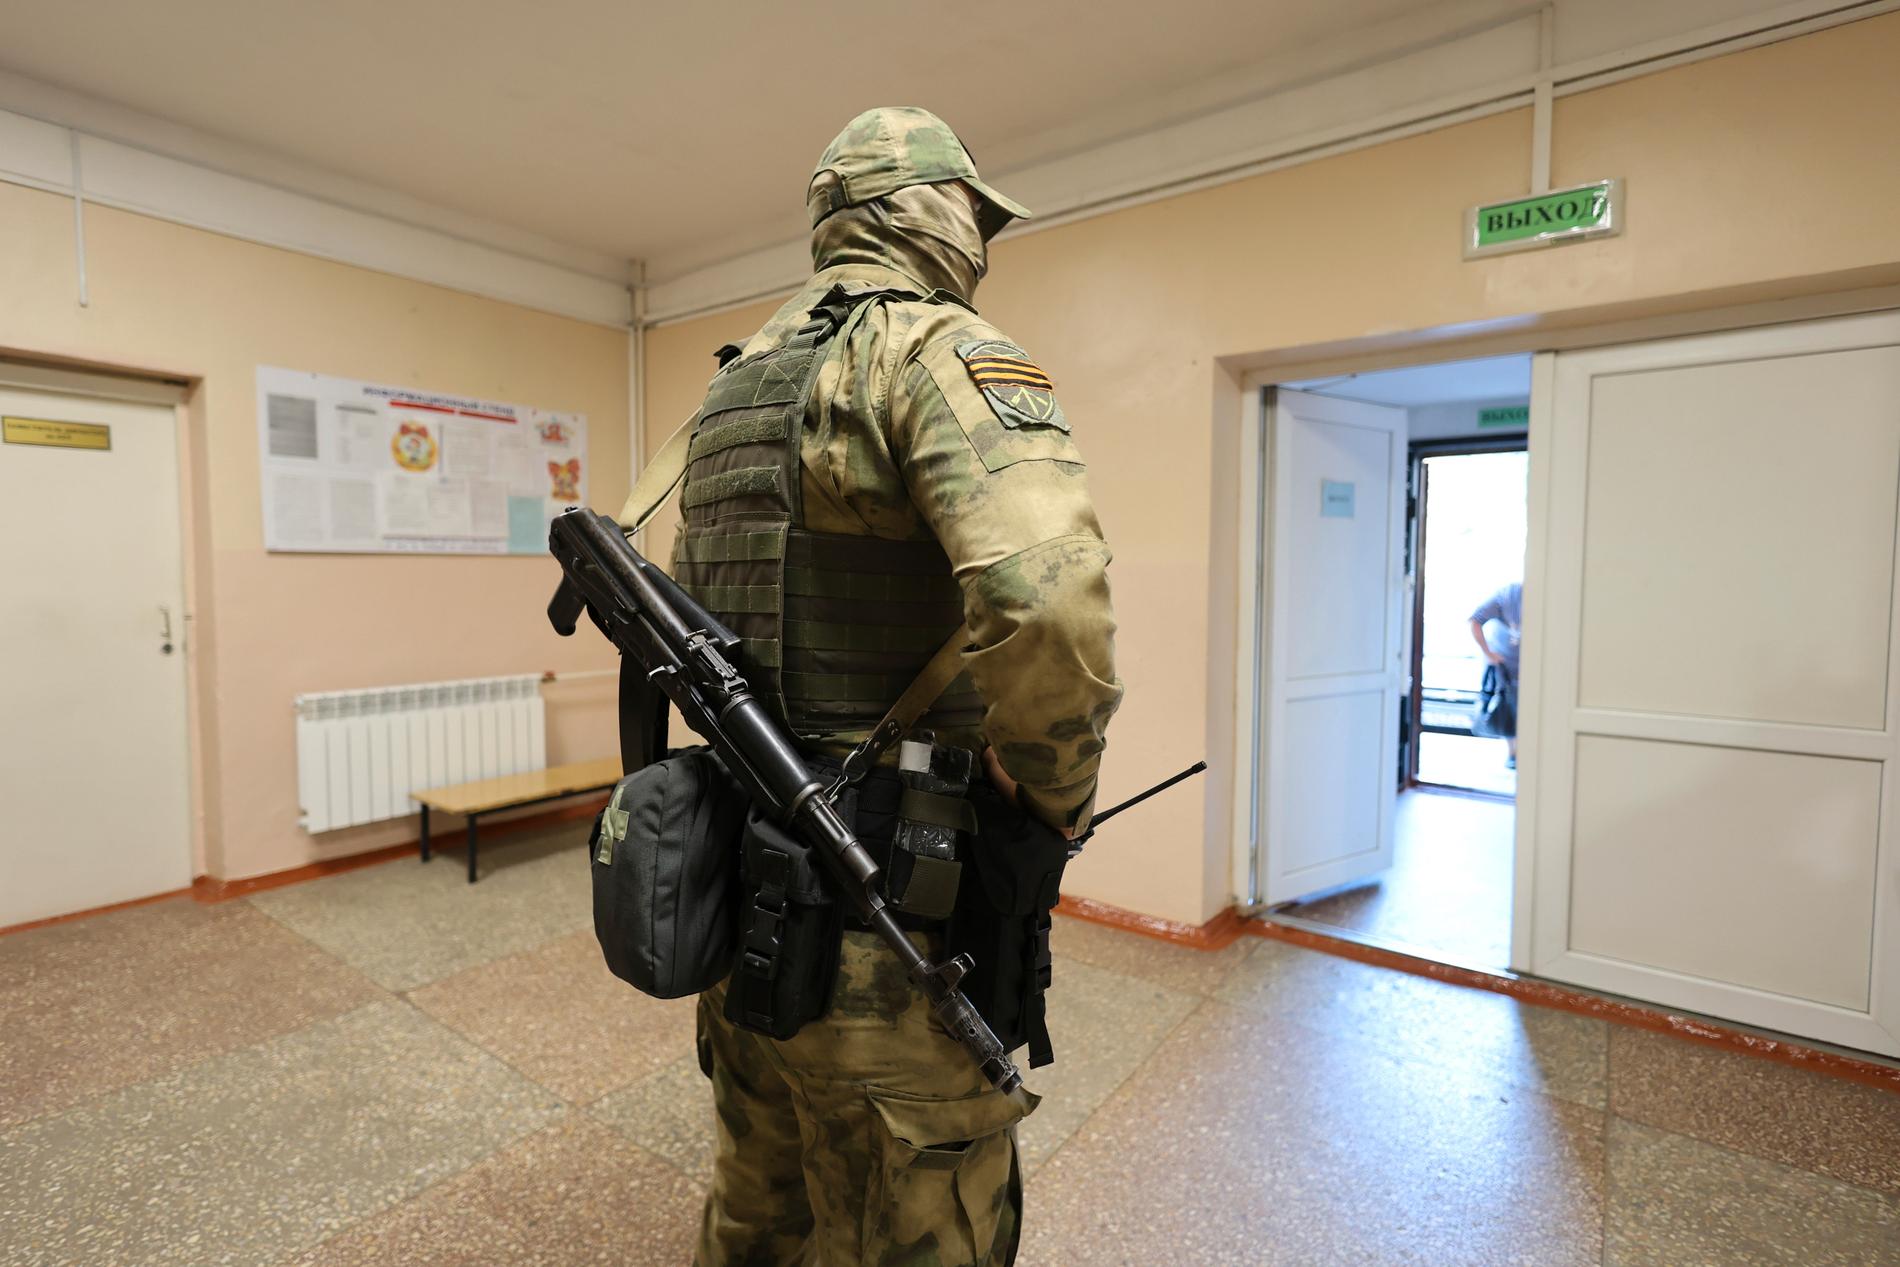 This is how voters in the Donetsk region greeted the weekend: an armed soldier at the polling stations.